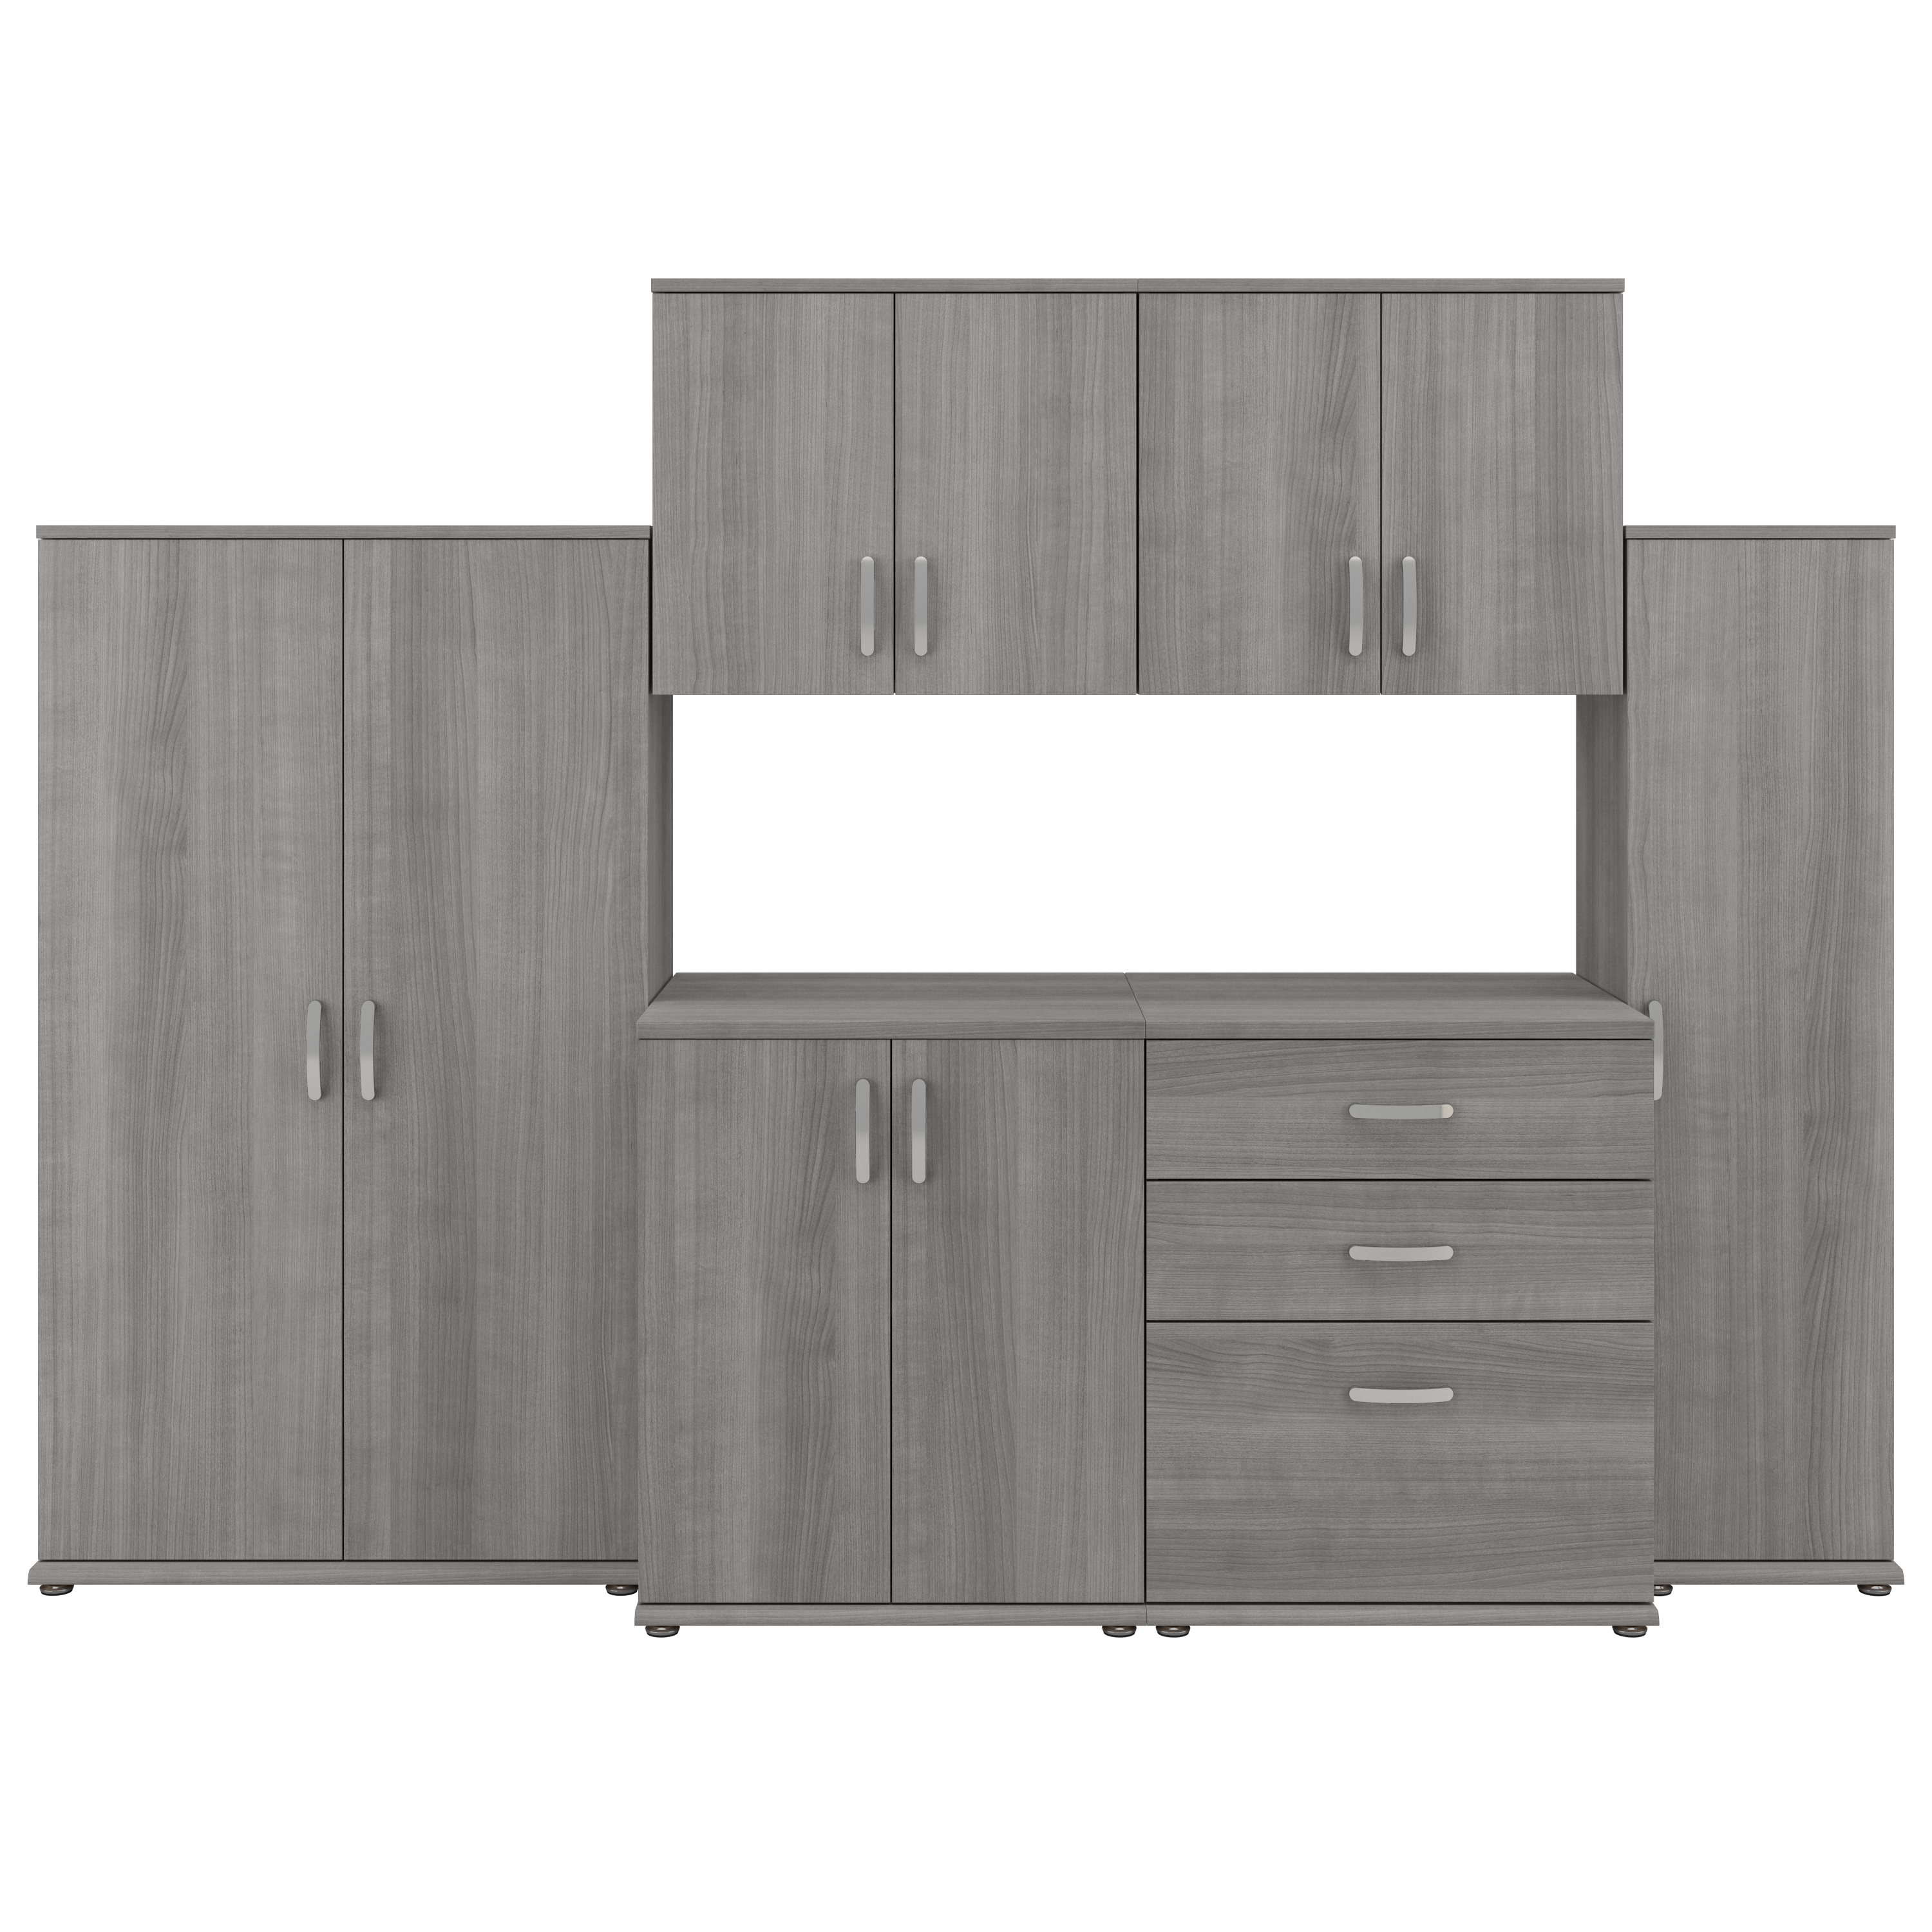 Shop Bush Business Furniture Universal 108W 6 Piece Modular Storage Set with Floor and Wall Cabinets 02 UNS002PG #color_platinum gray